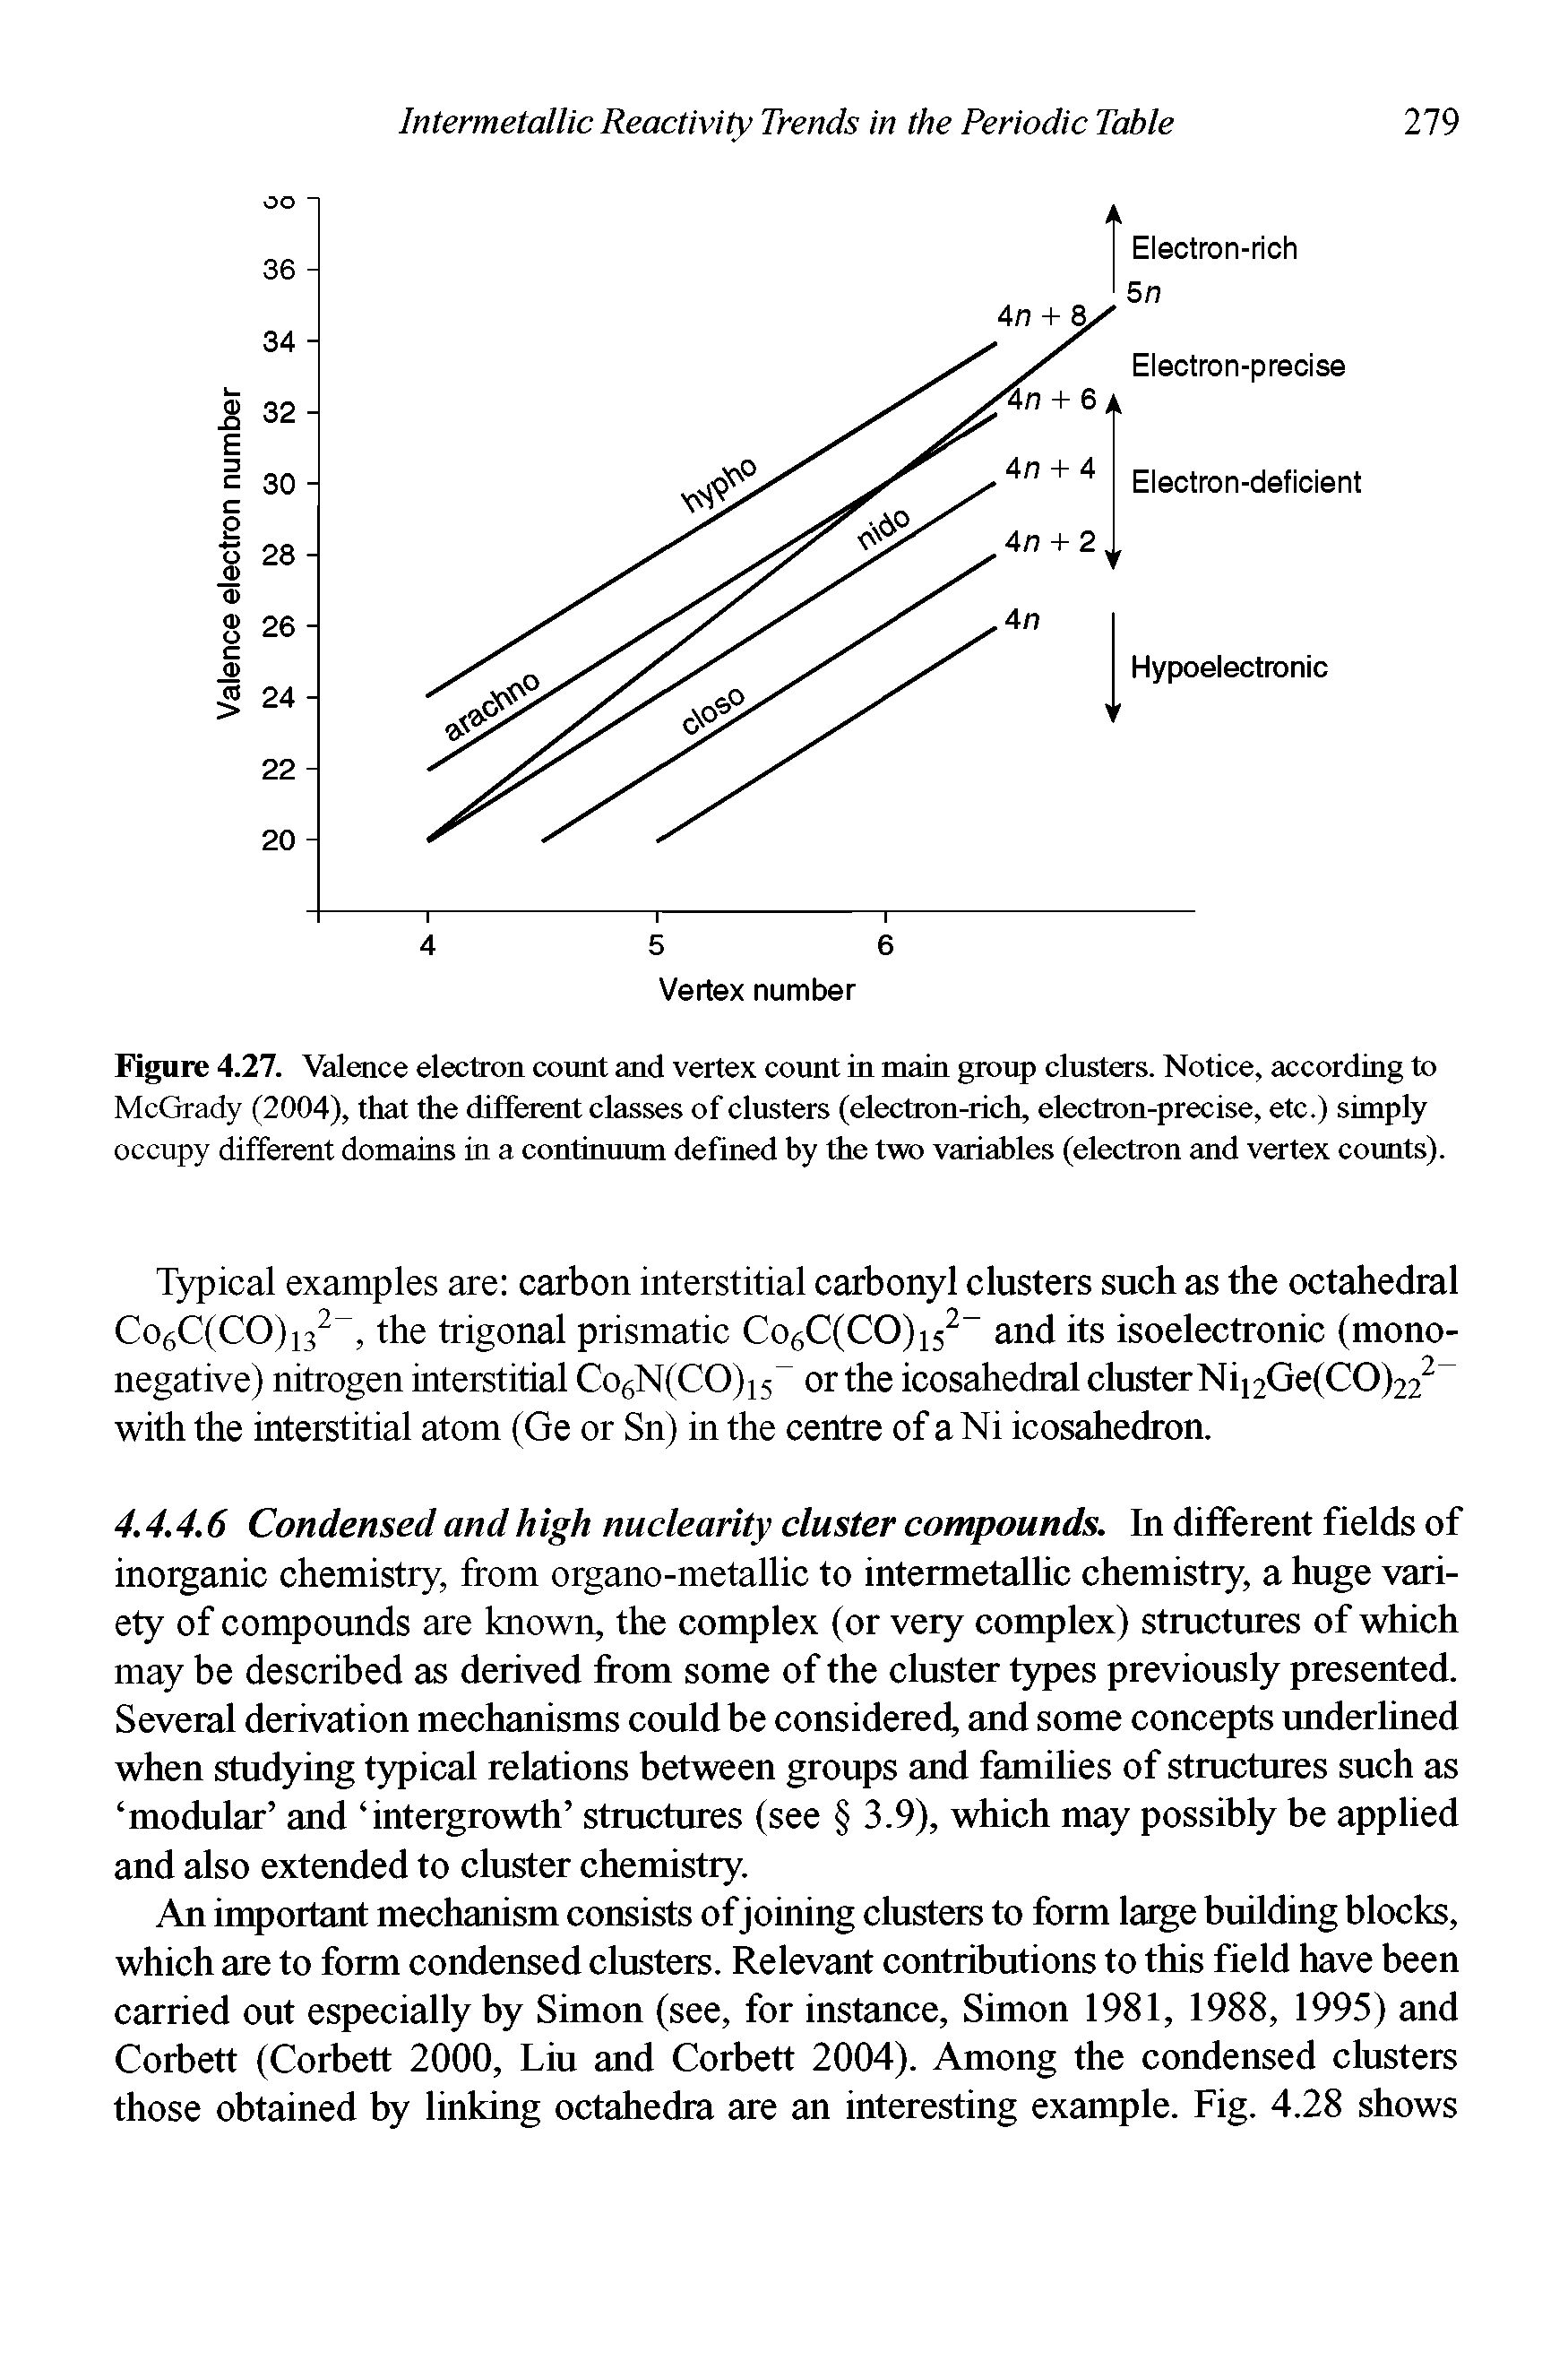 Figure 4.27. Valence electron count and vertex count in main group clusters. Notice, according to McGrady (2004), that the different classes of clusters (electron-rich, electron-precise, etc.) simply occupy different domains in a continuum defined by the two variables (electron and vertex counts).